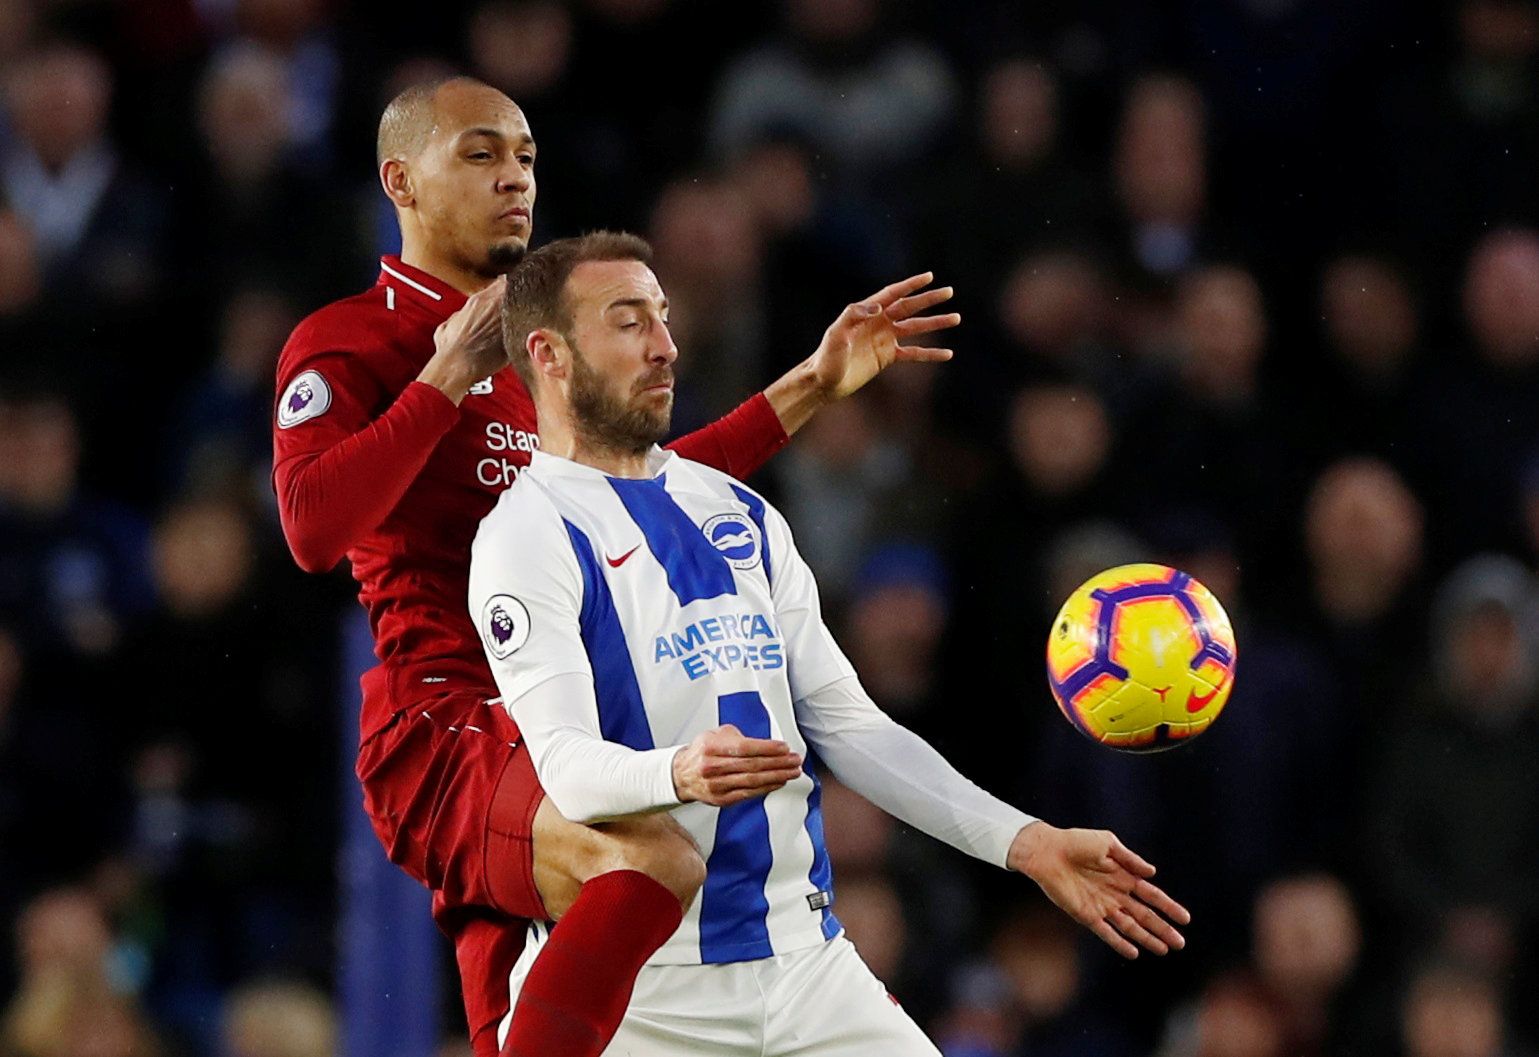 Soccer Football - Premier League - Brighton &amp; Hove Albion v Liverpool - The American Express Community Stadium, Brighton, Britain - January 12, 2019  Brighton's Glenn Murray in action with Liverpool's Fabinho   Action Images via Reuters/Paul Childs  EDITORIAL USE ONLY. No use with unauthorized audio, video, data, fixture lists, club/league logos or 